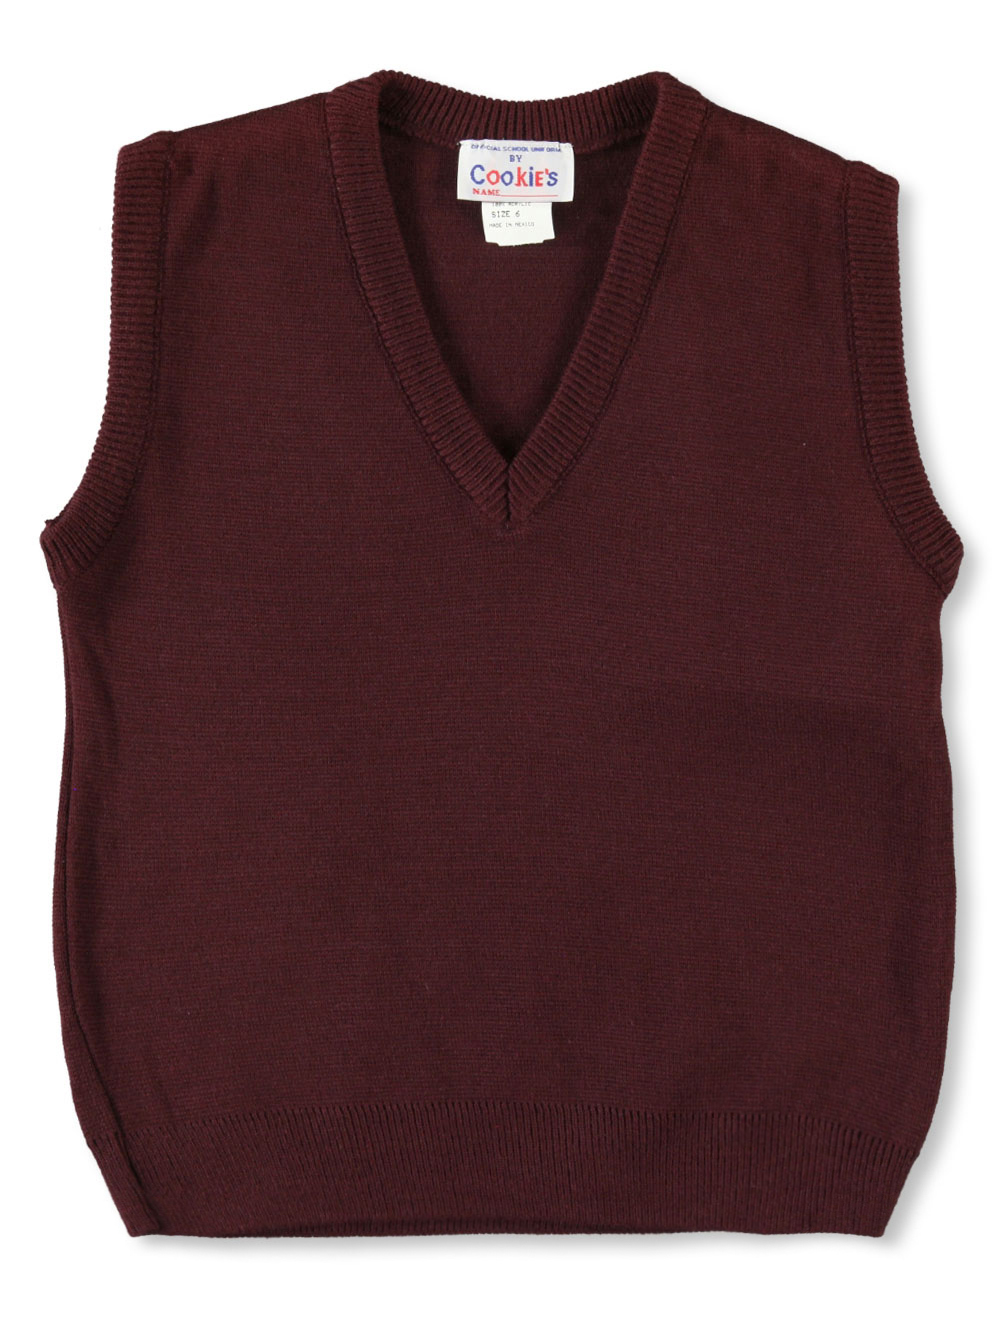 Size 7-8 Sweatersvests for Girls